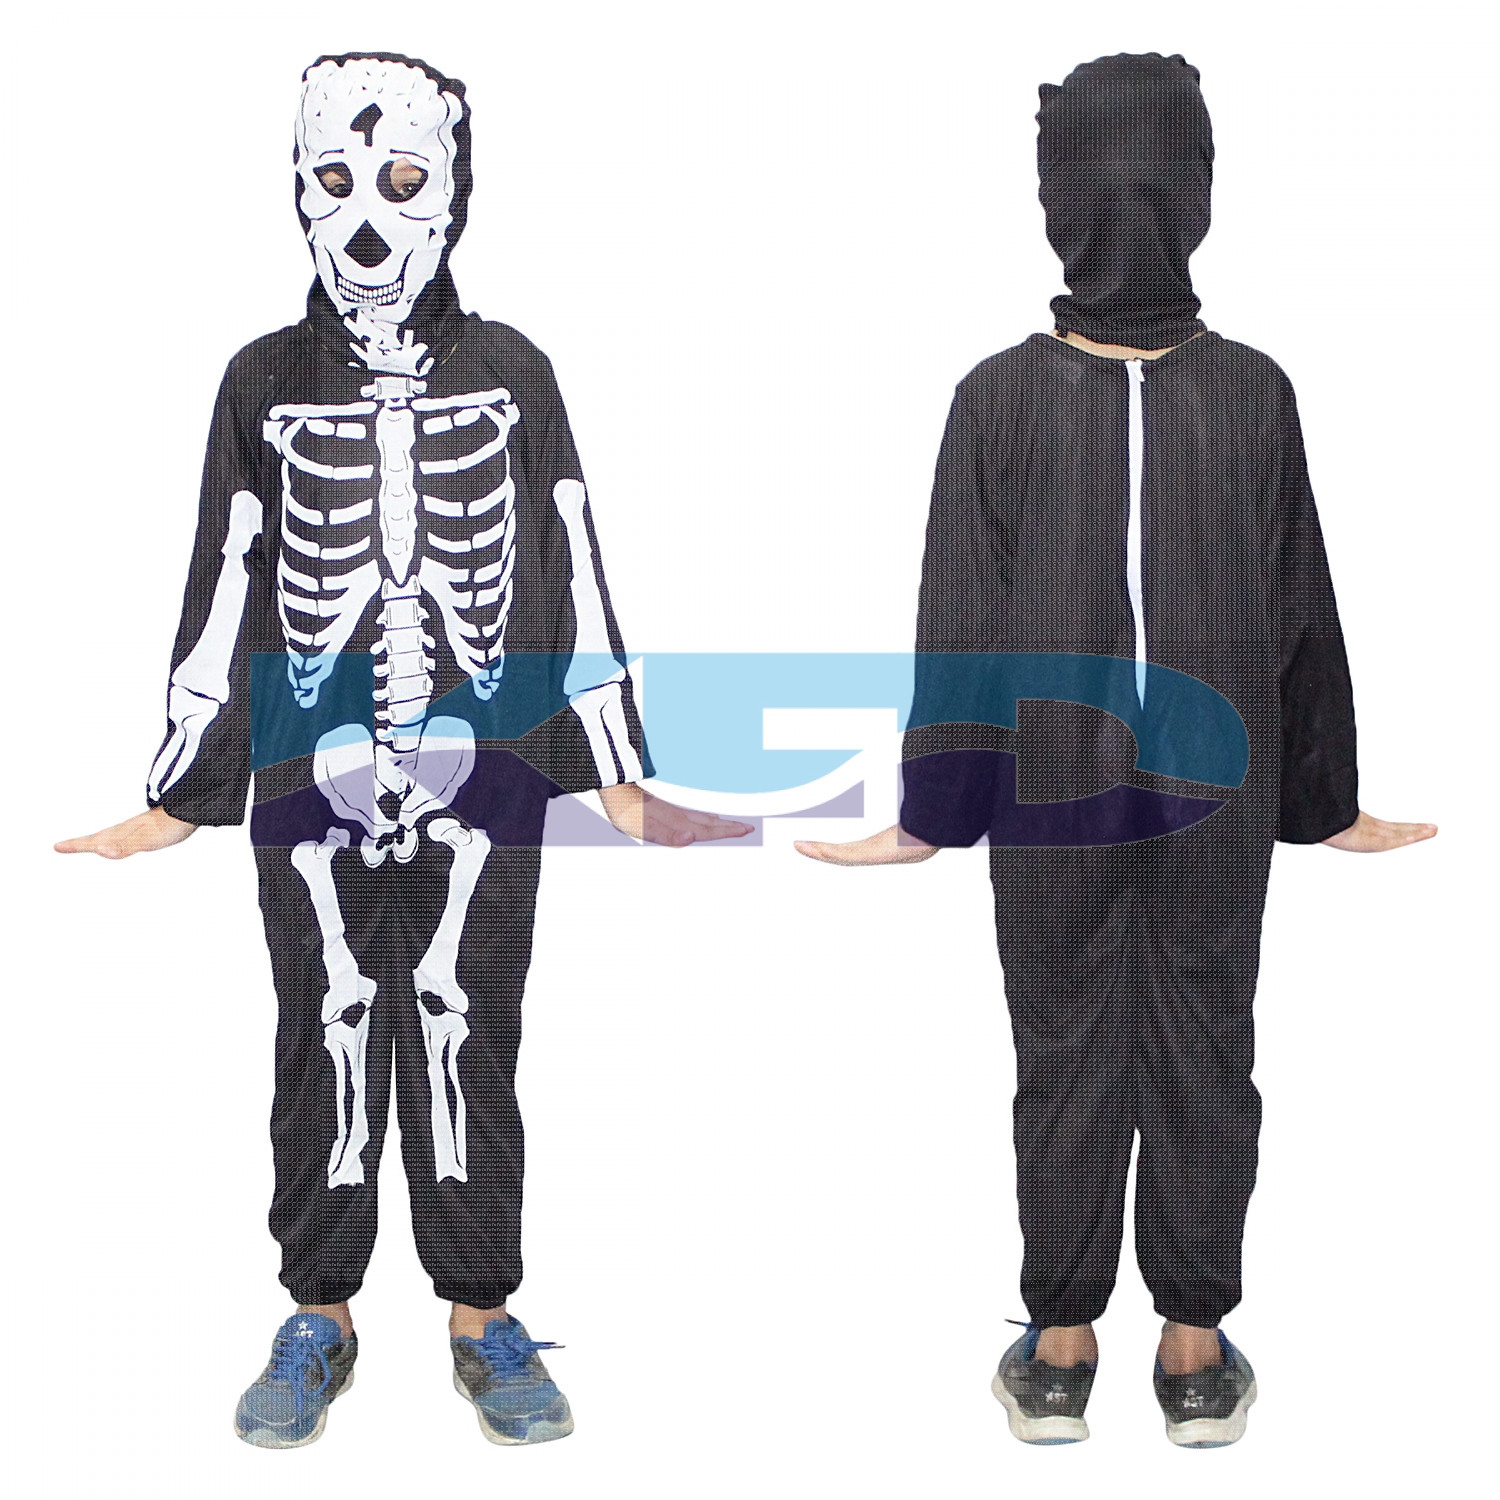 Skeleton fancy dress for kids,Halloween Costume for School Annual function/Theme Party/Competition/Stage Shows Dress